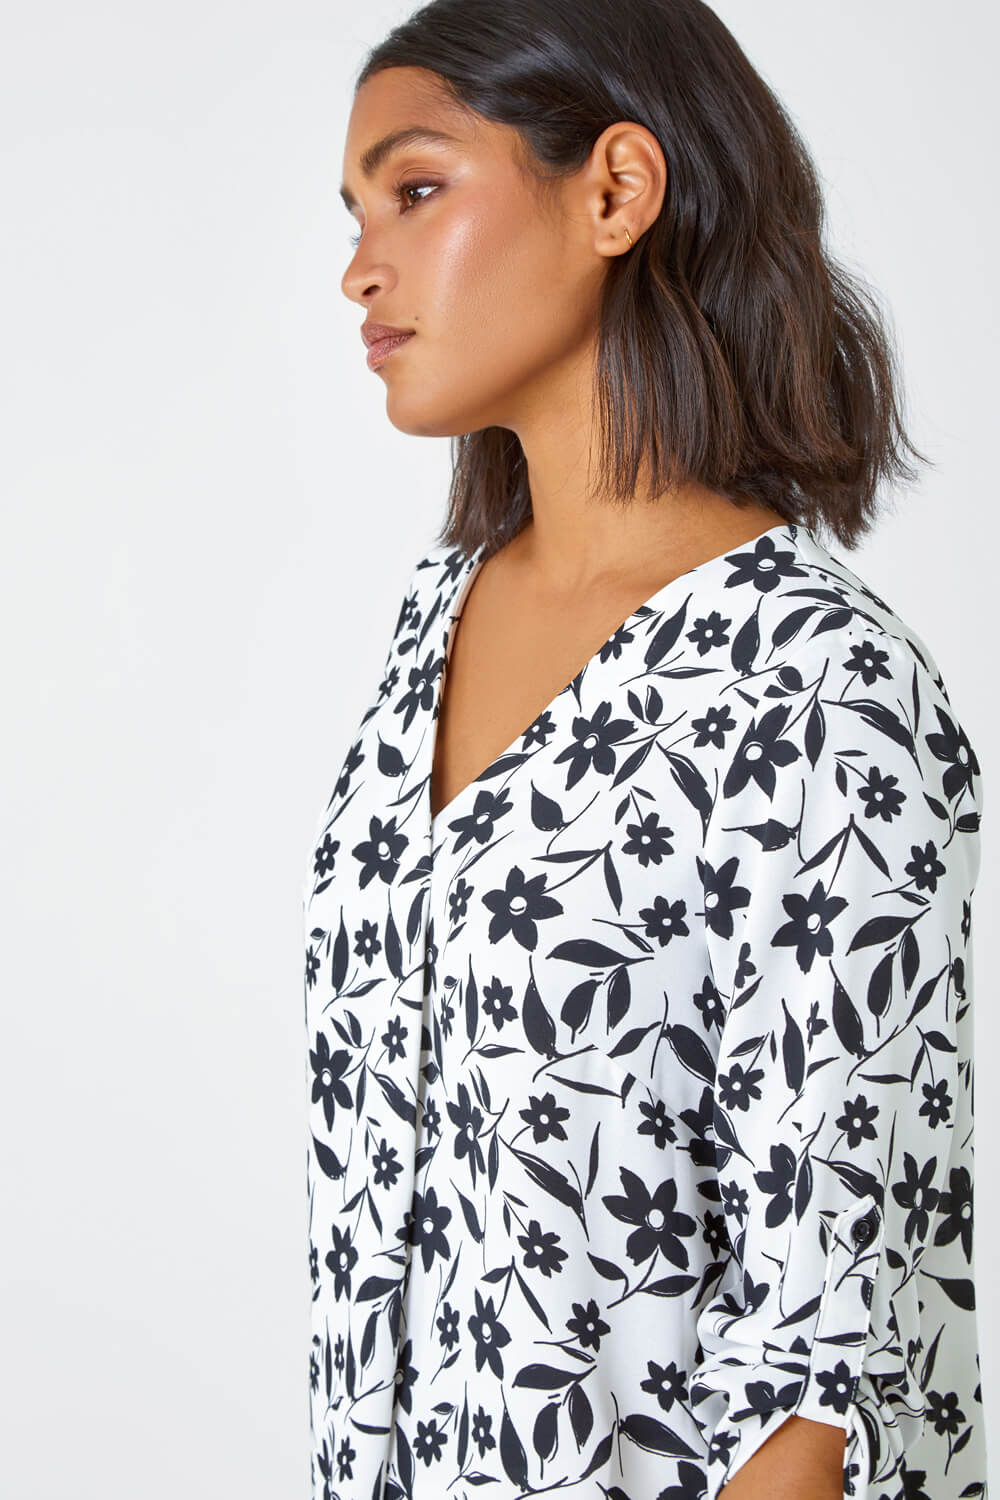 Black Floral Print Pleat Front Tunic Top, Image 4 of 5